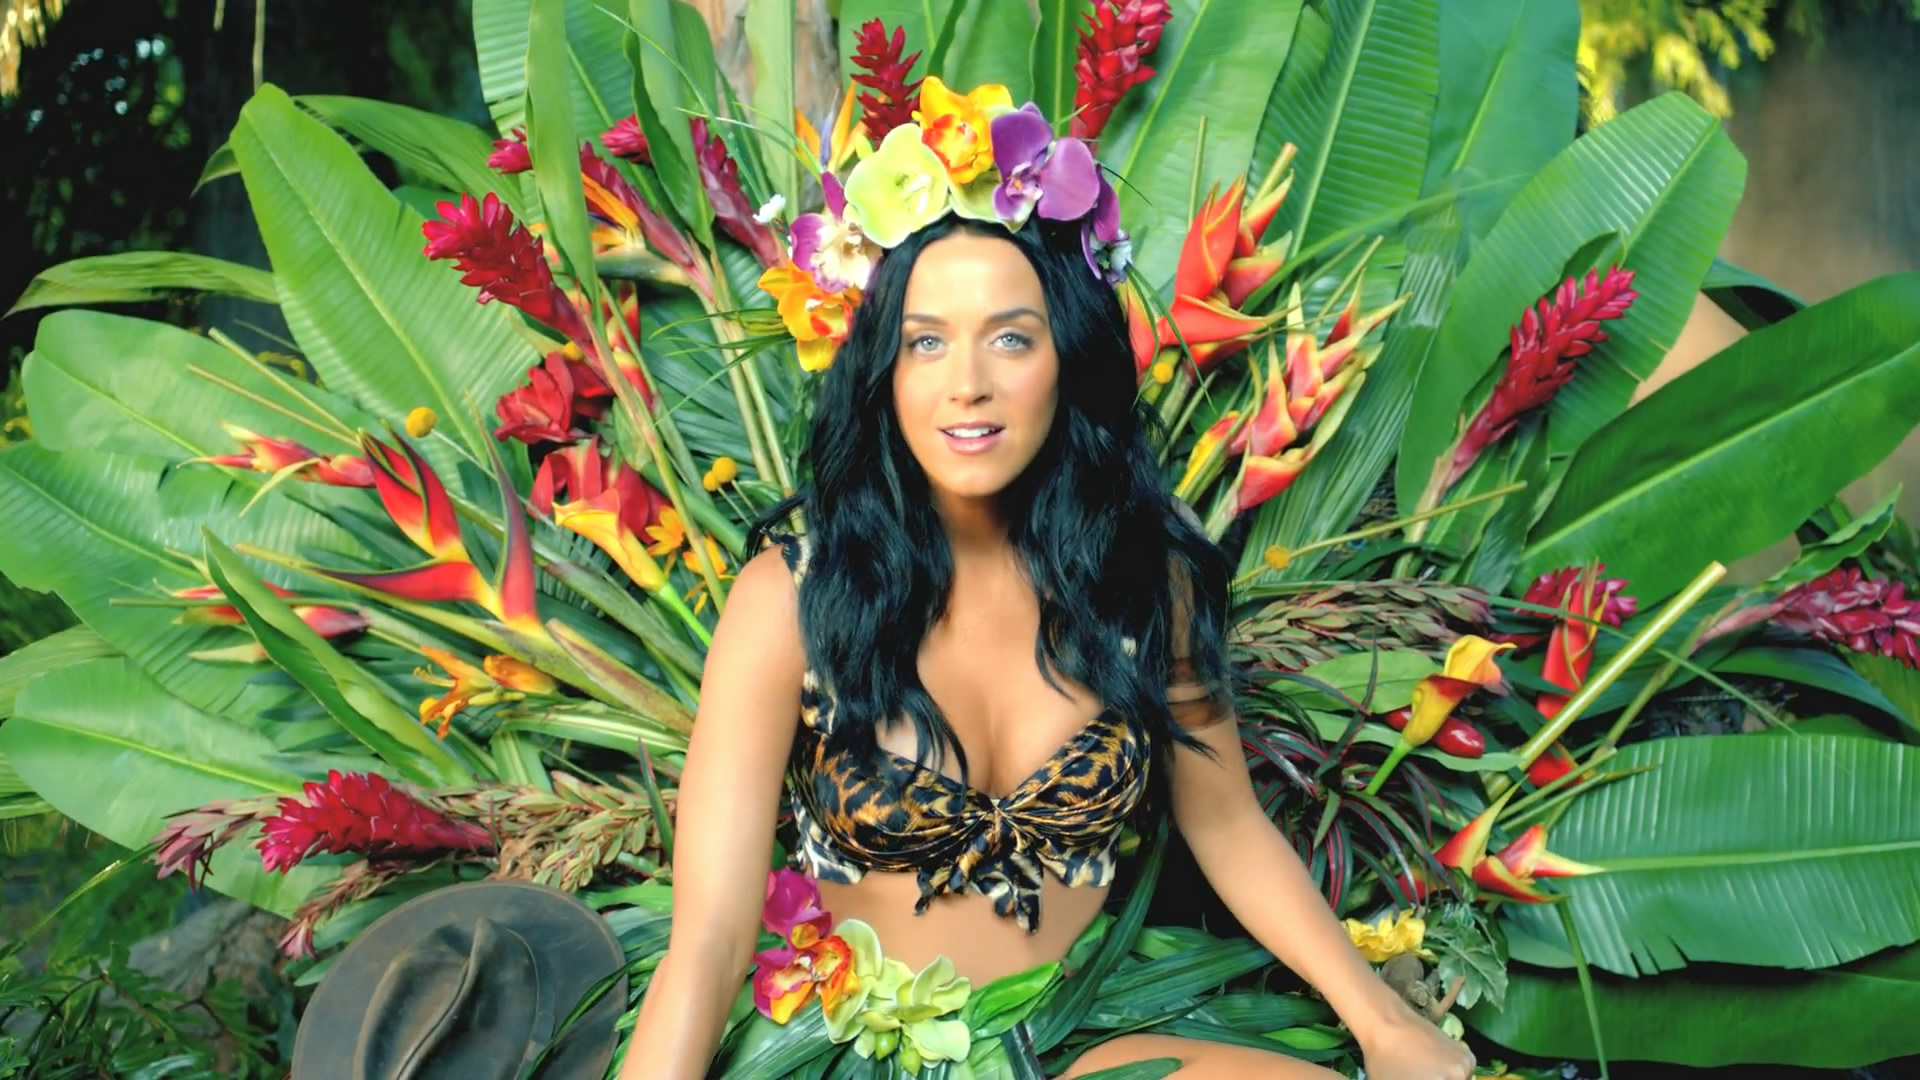 Katy Perry Roar Wallpaper Image Pictures Becuo